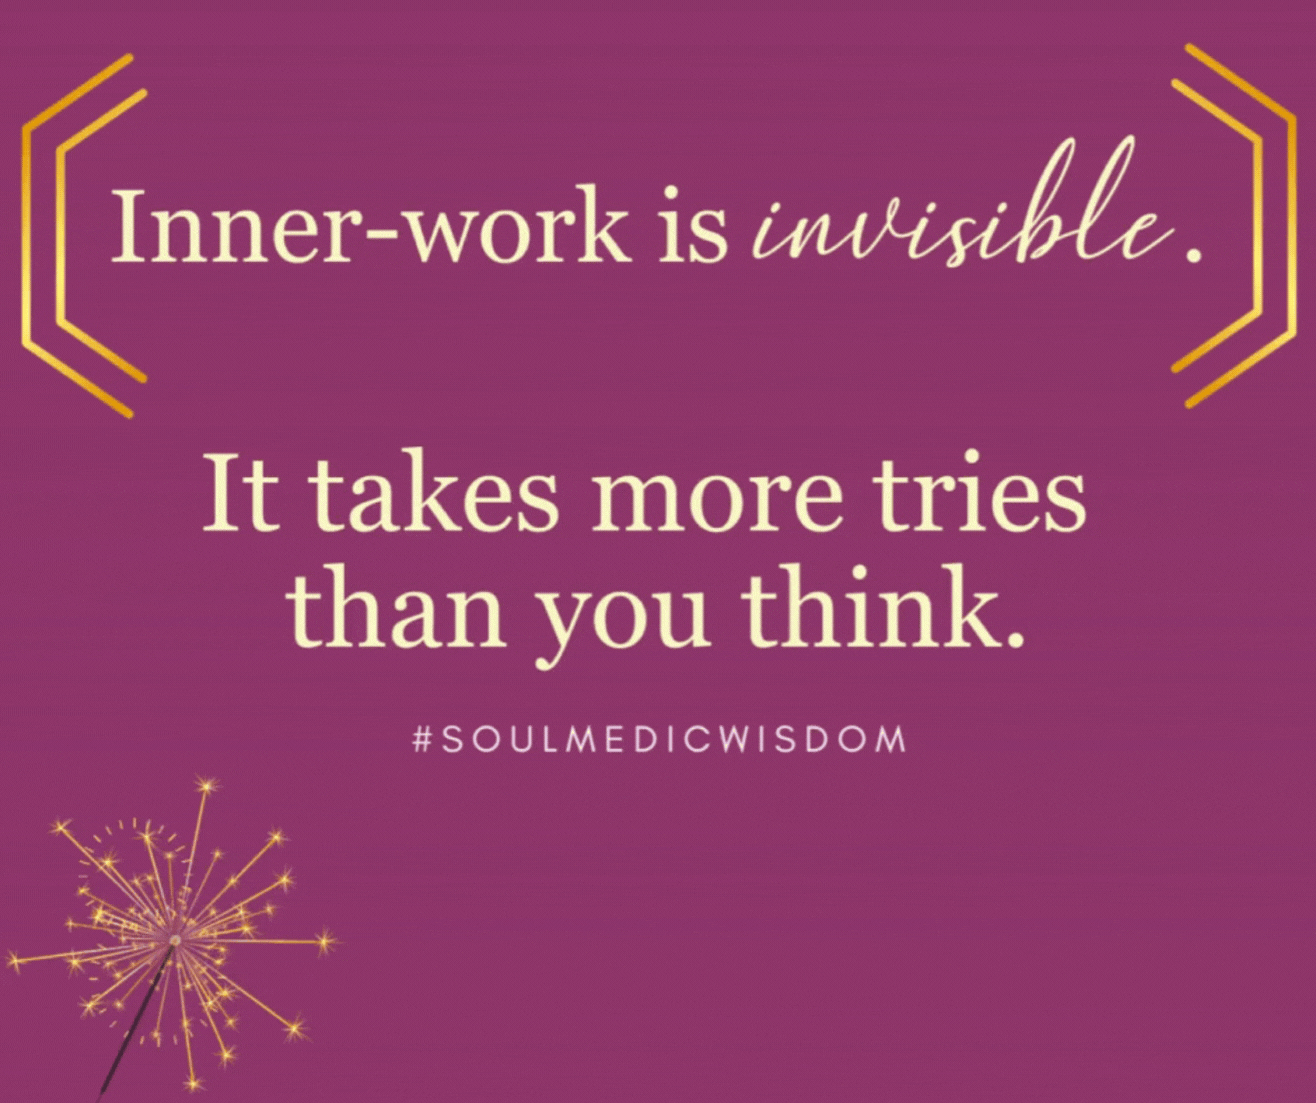 Image with text reading "Inner-work is invisible. It takes more tries than you think." #soulmedicwisdom with four gold stars appearing at the bottom in succession